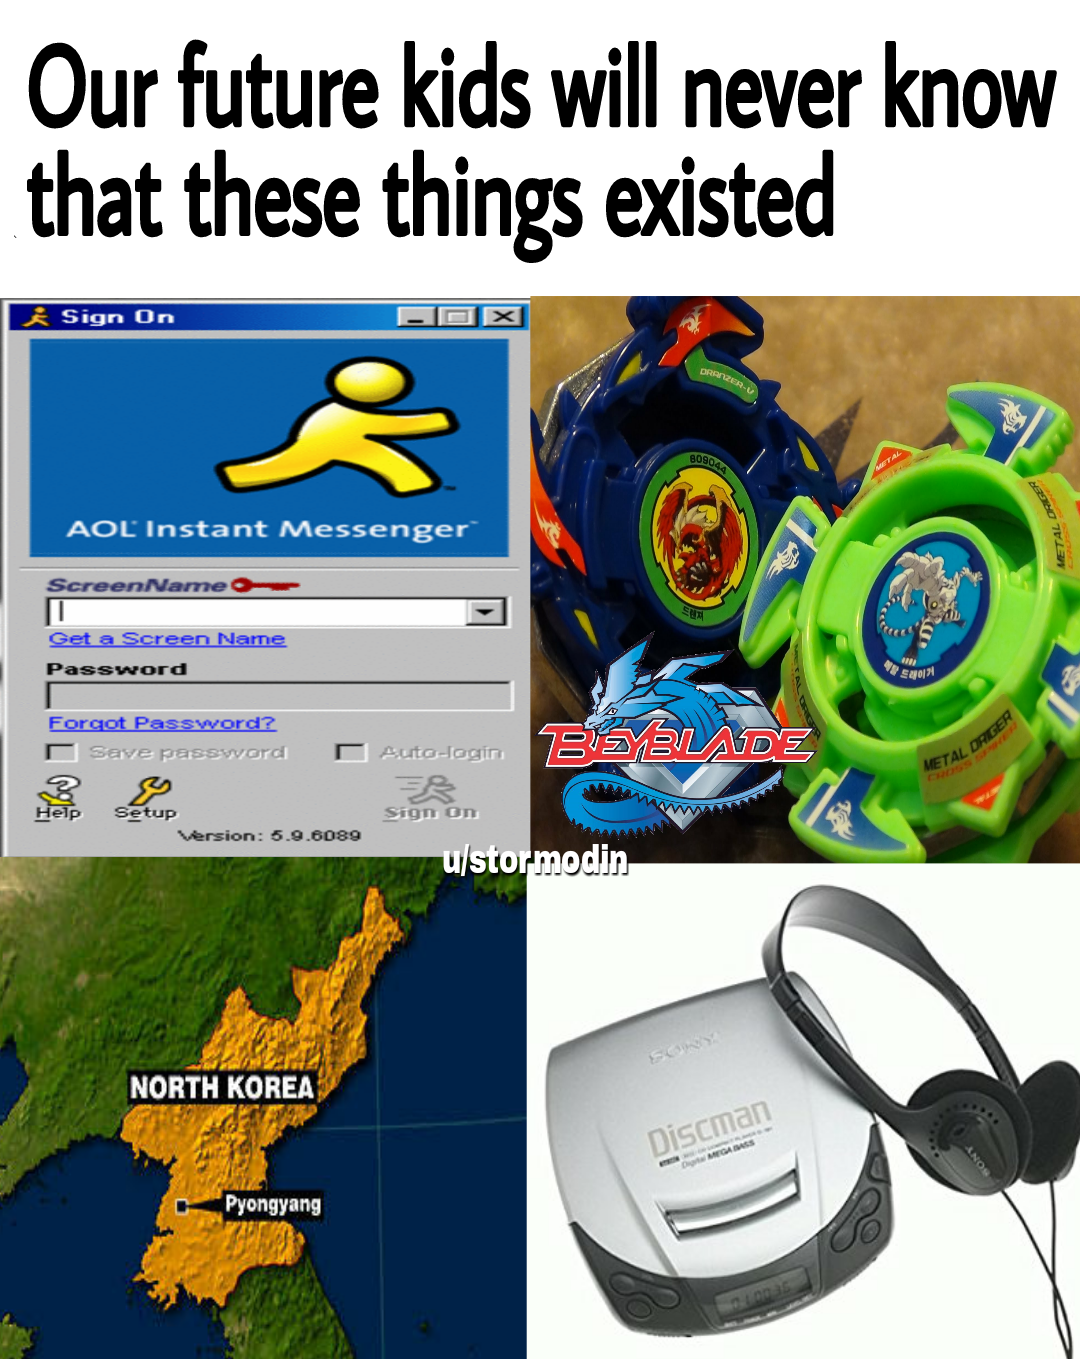 today's kids will never know memes - Our future kids will never know that these things existed Sign On Aol Instant Messenger Gia Scrome Forgot Pass cro Smlade 6000 ustor modin North Korea DISeman Pyongyang